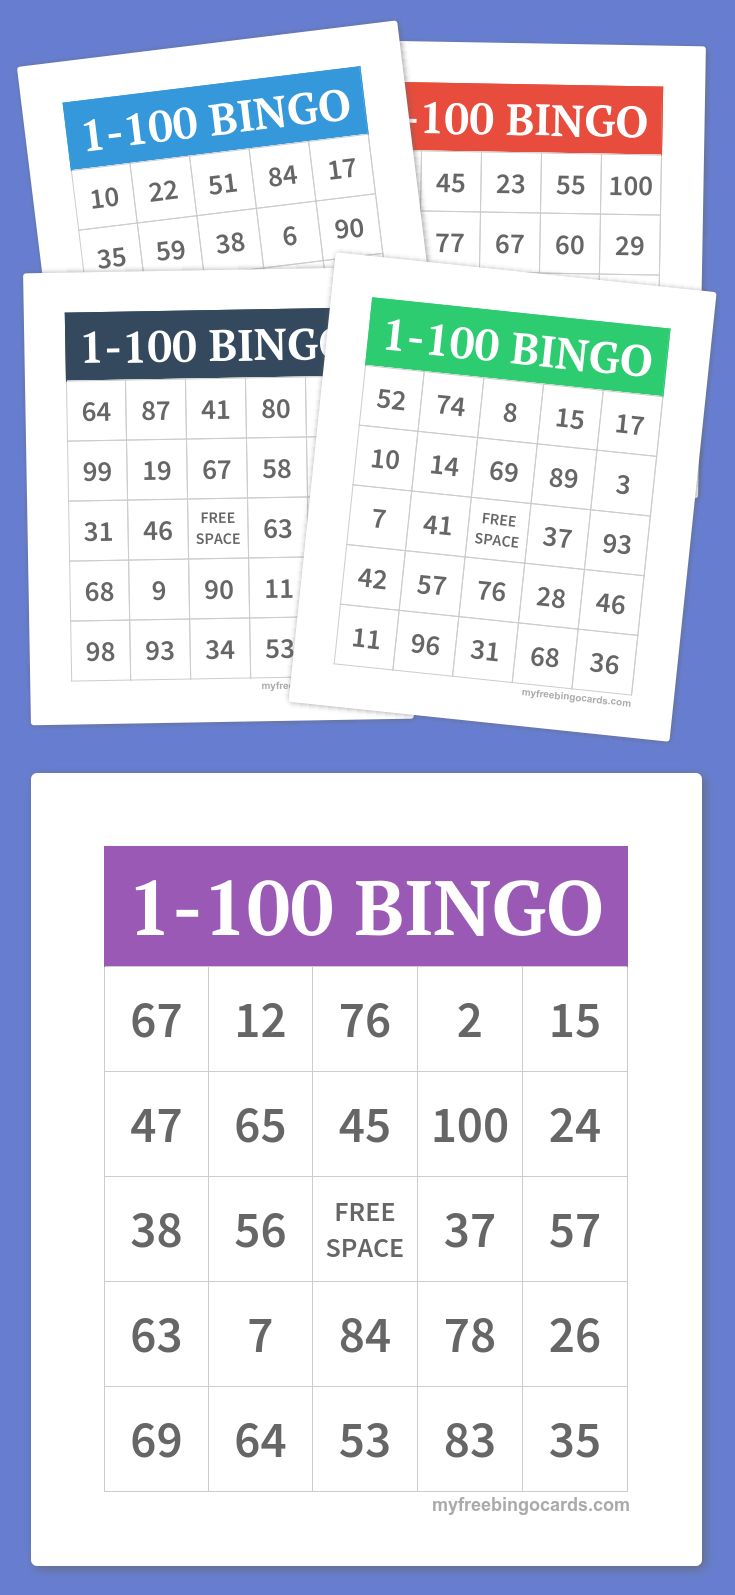 Bingo Cards And Chips